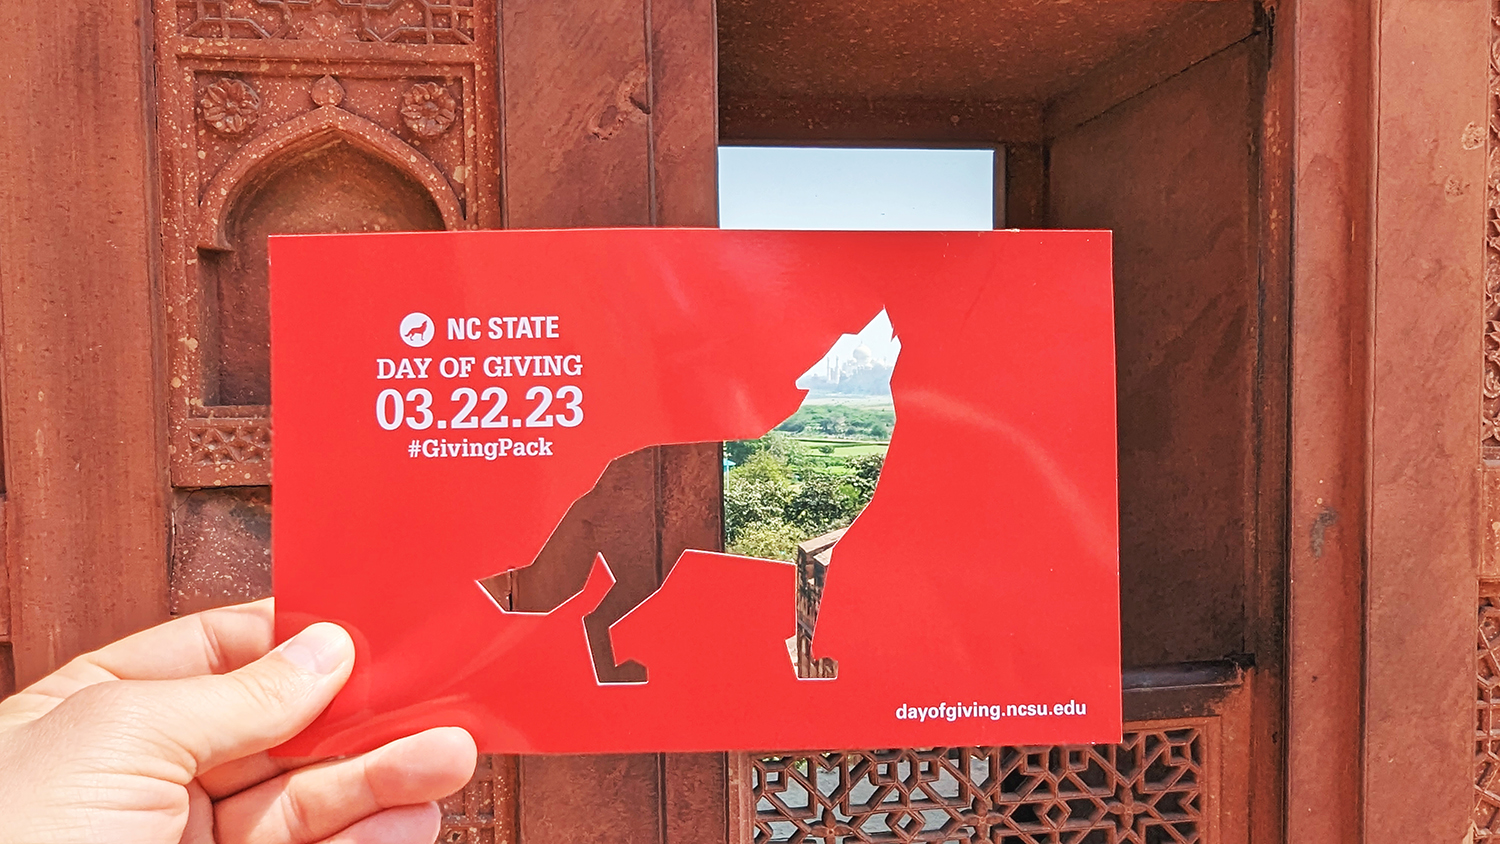 Hand holding a red card with an outline of a howling wolf cutout so as to see the view of the brick building and landscape behind. Day of Giving 3/22/2023 #GivingPack is written in white letters on the card.